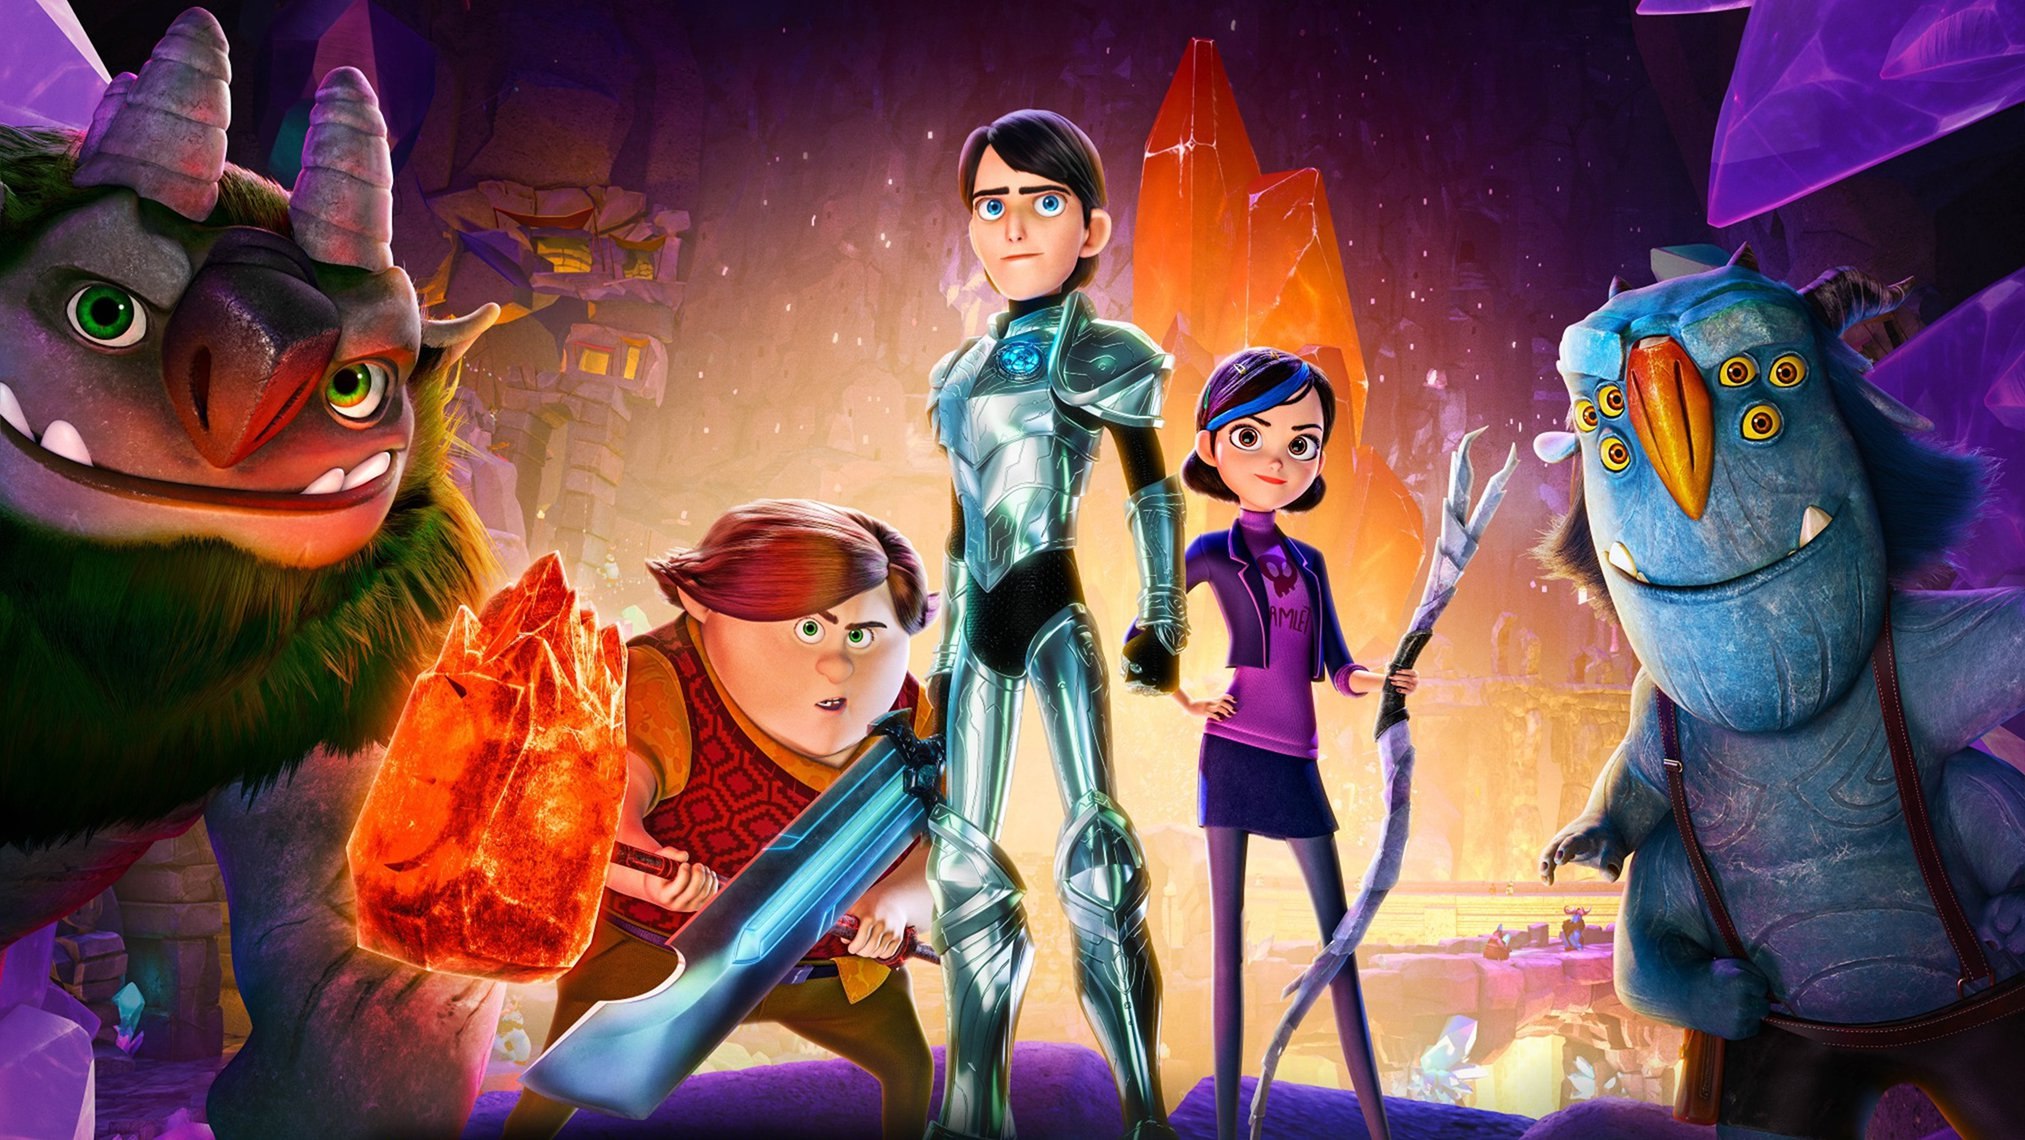 100+] Trollhunters Tales Of Arcadia Wallpapers | Wallpapers.com